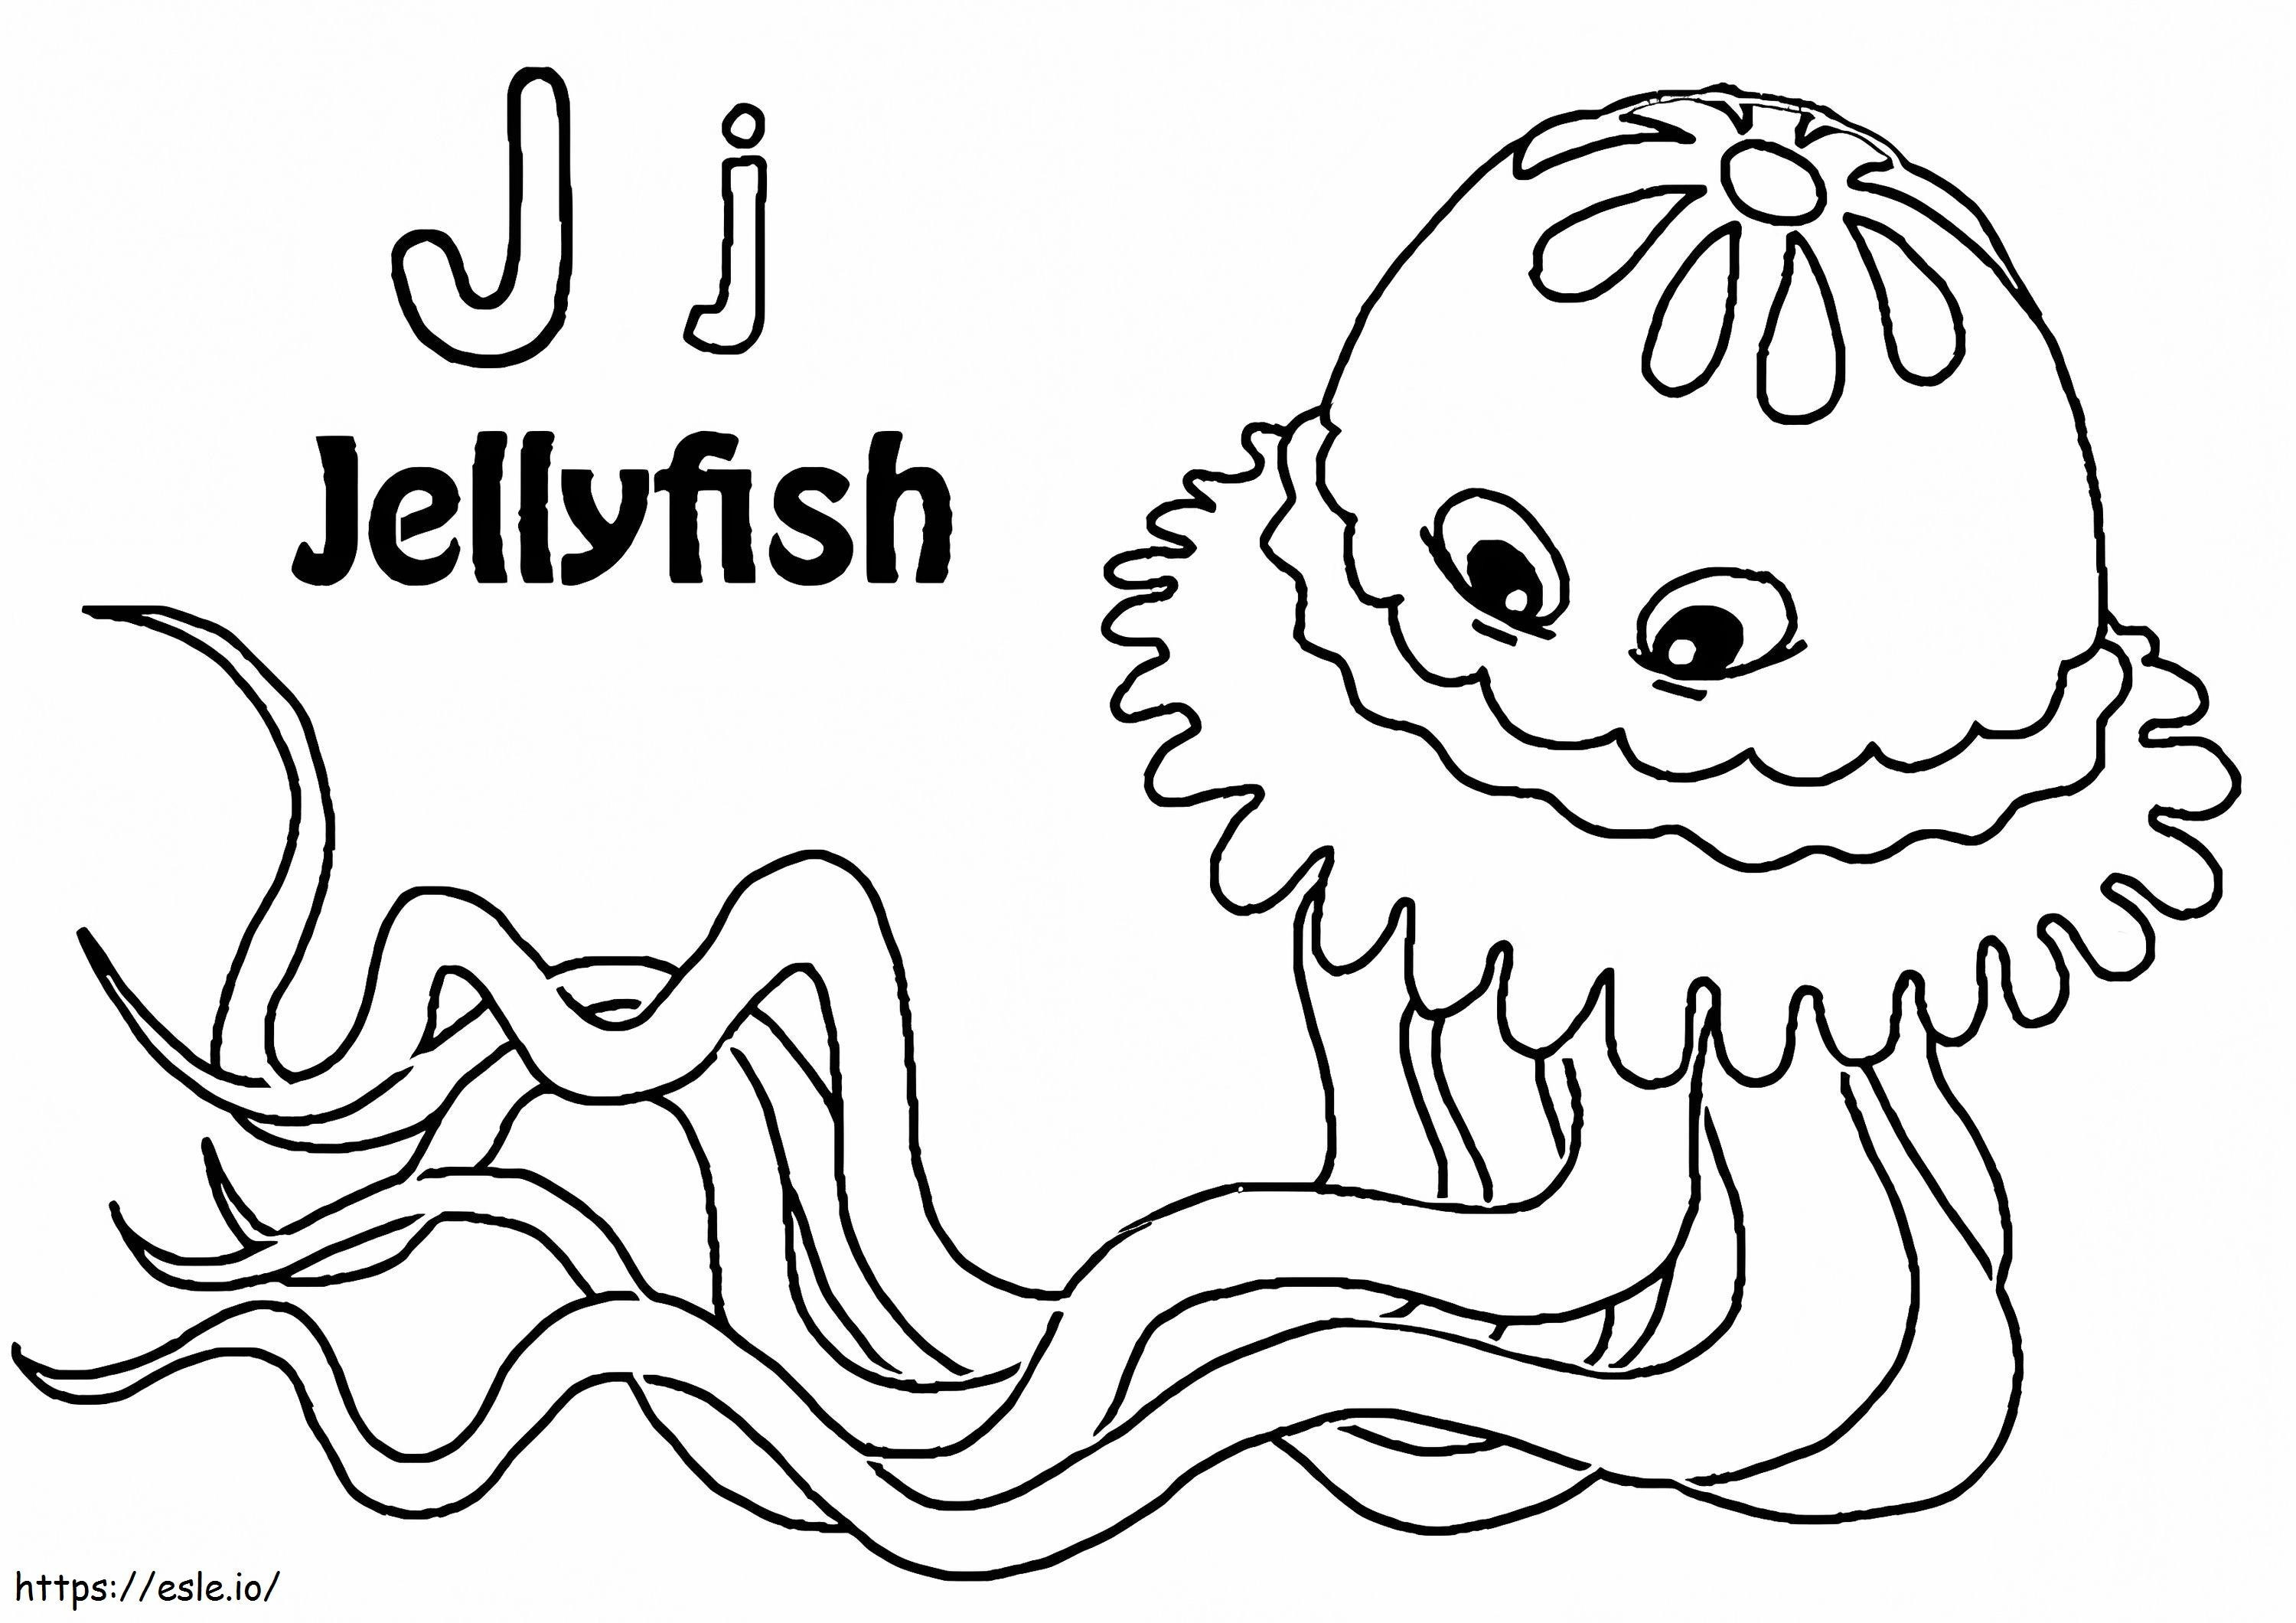 1526292604 J For Jellyfish A4 E1600679023149 coloring page